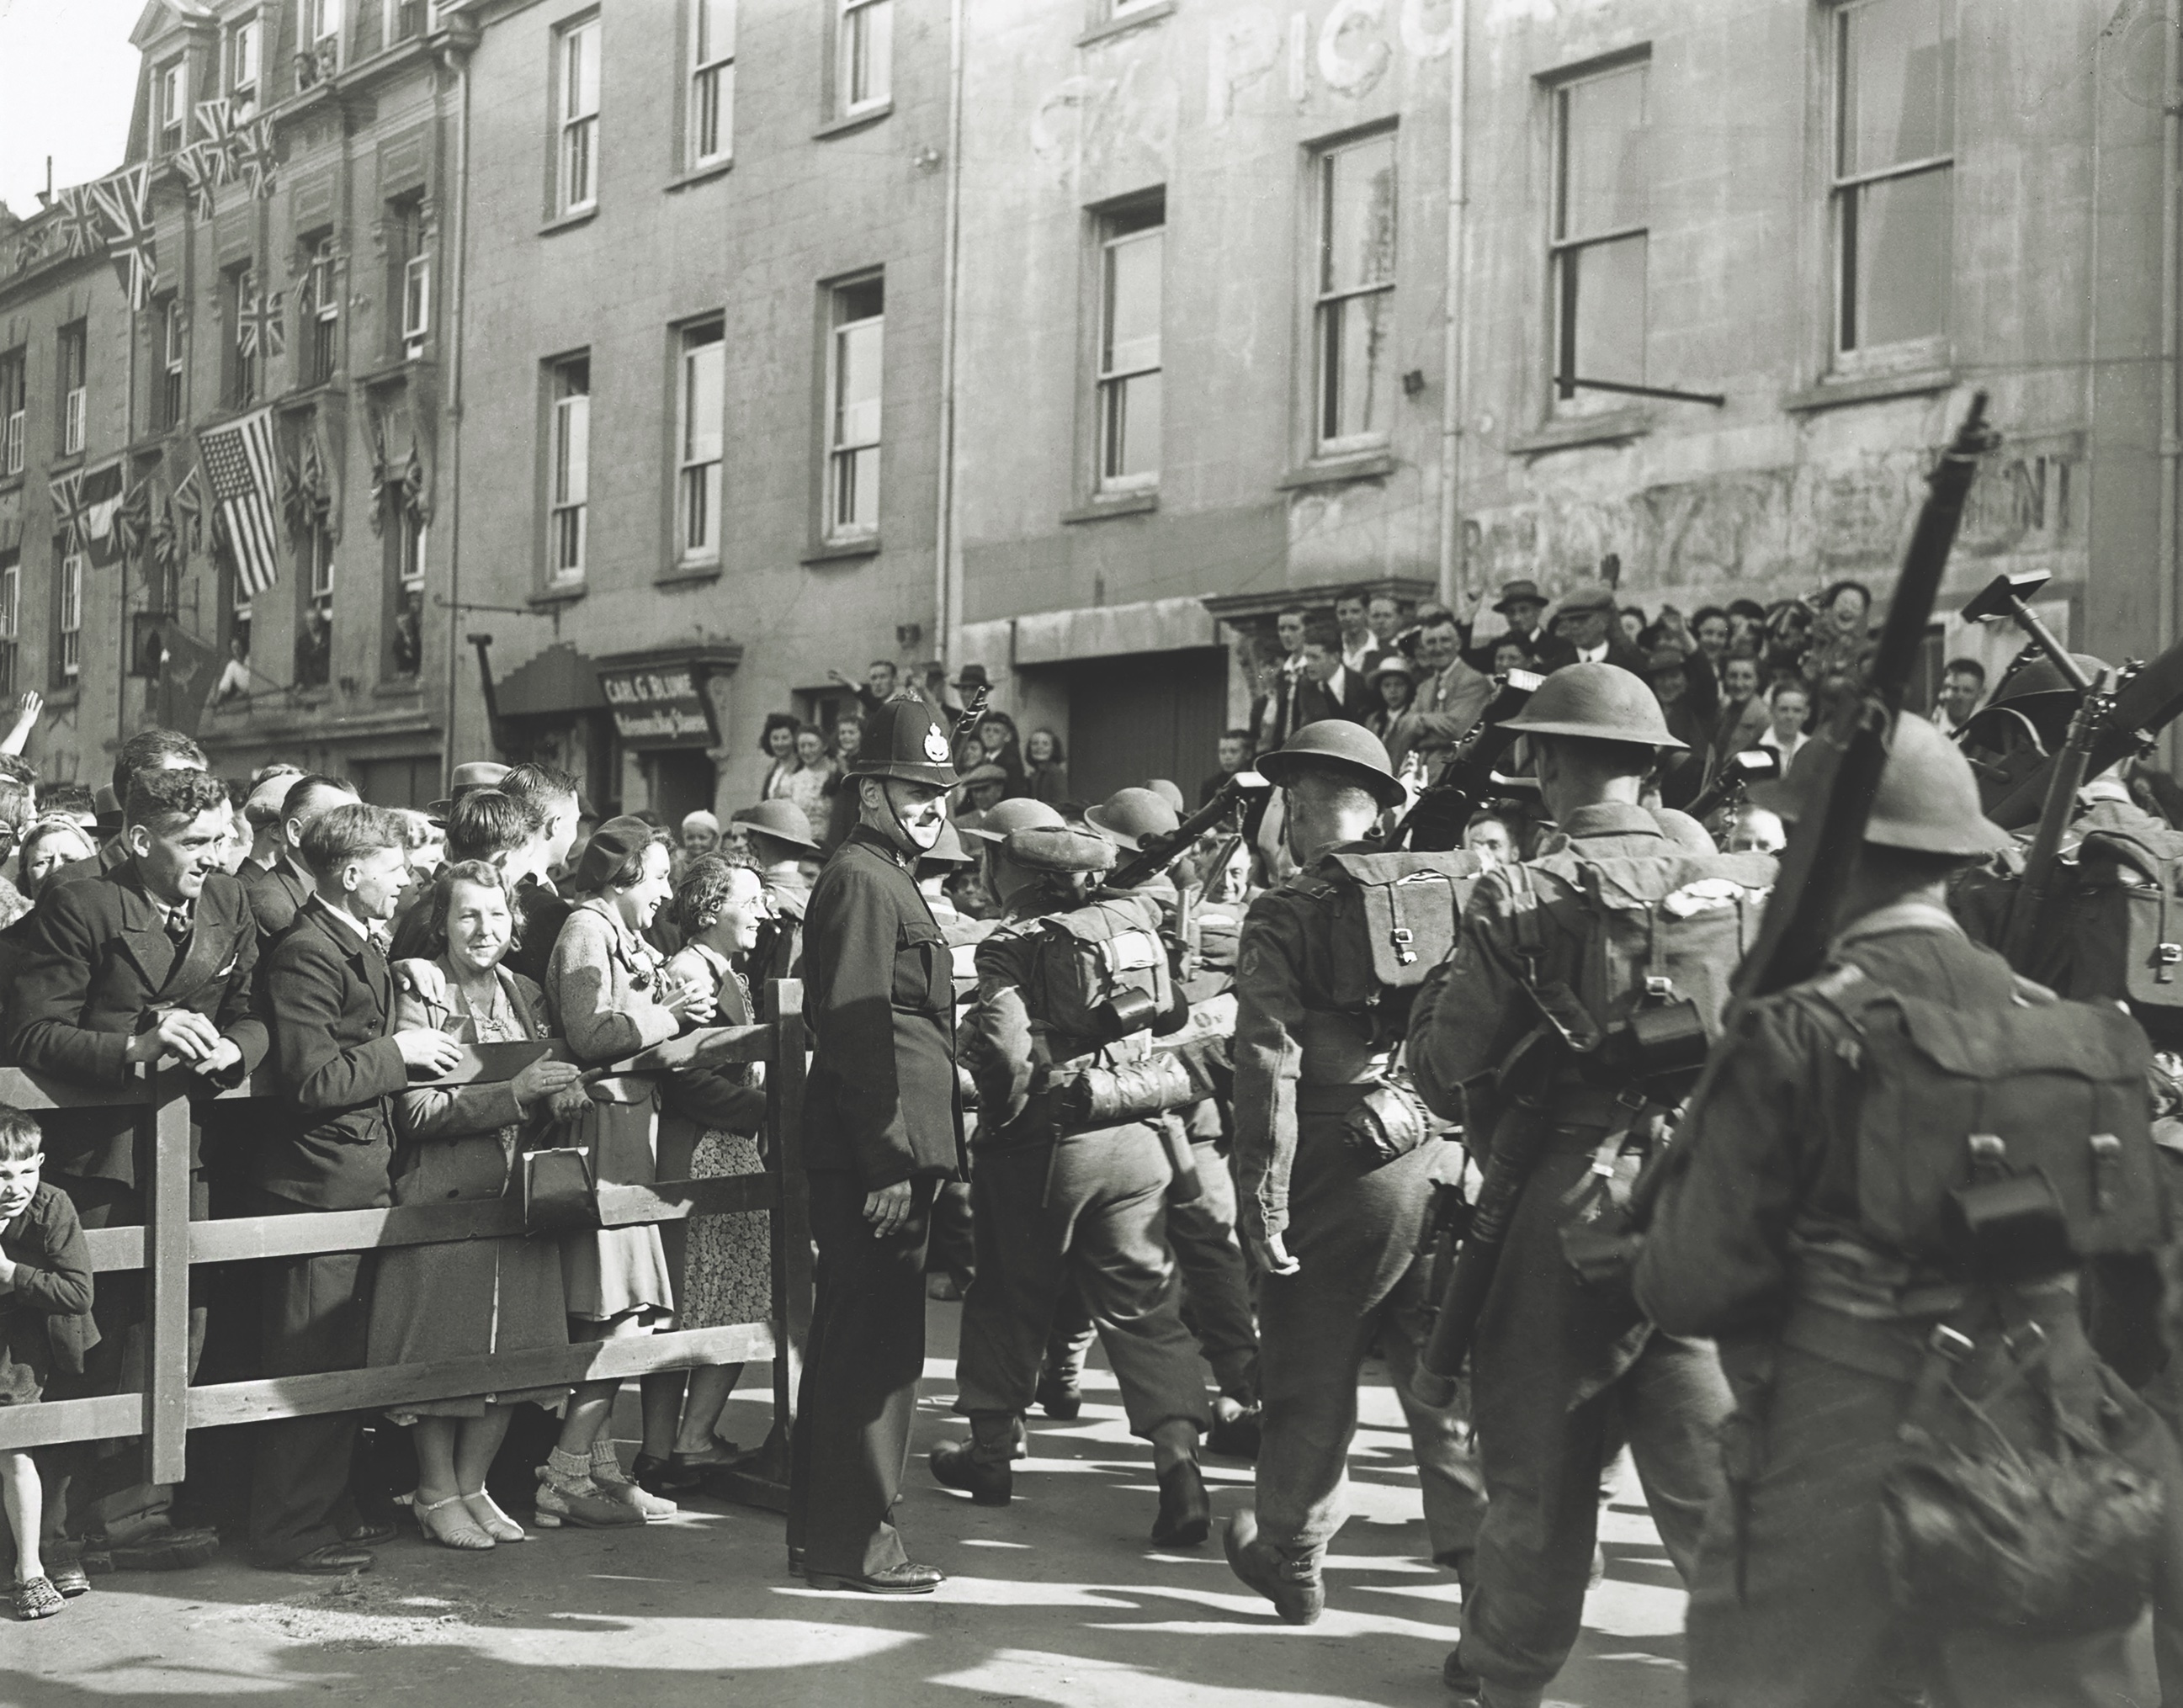 Exuberant crowds welcome British troops on Jersey on May 13, 1945, four days after Germany formally surrendered to the Allies. Vice Admiral Friedrich Hüffmeier had been taken into custody the previous day. (Harry Shepherd/ Getty Images) 